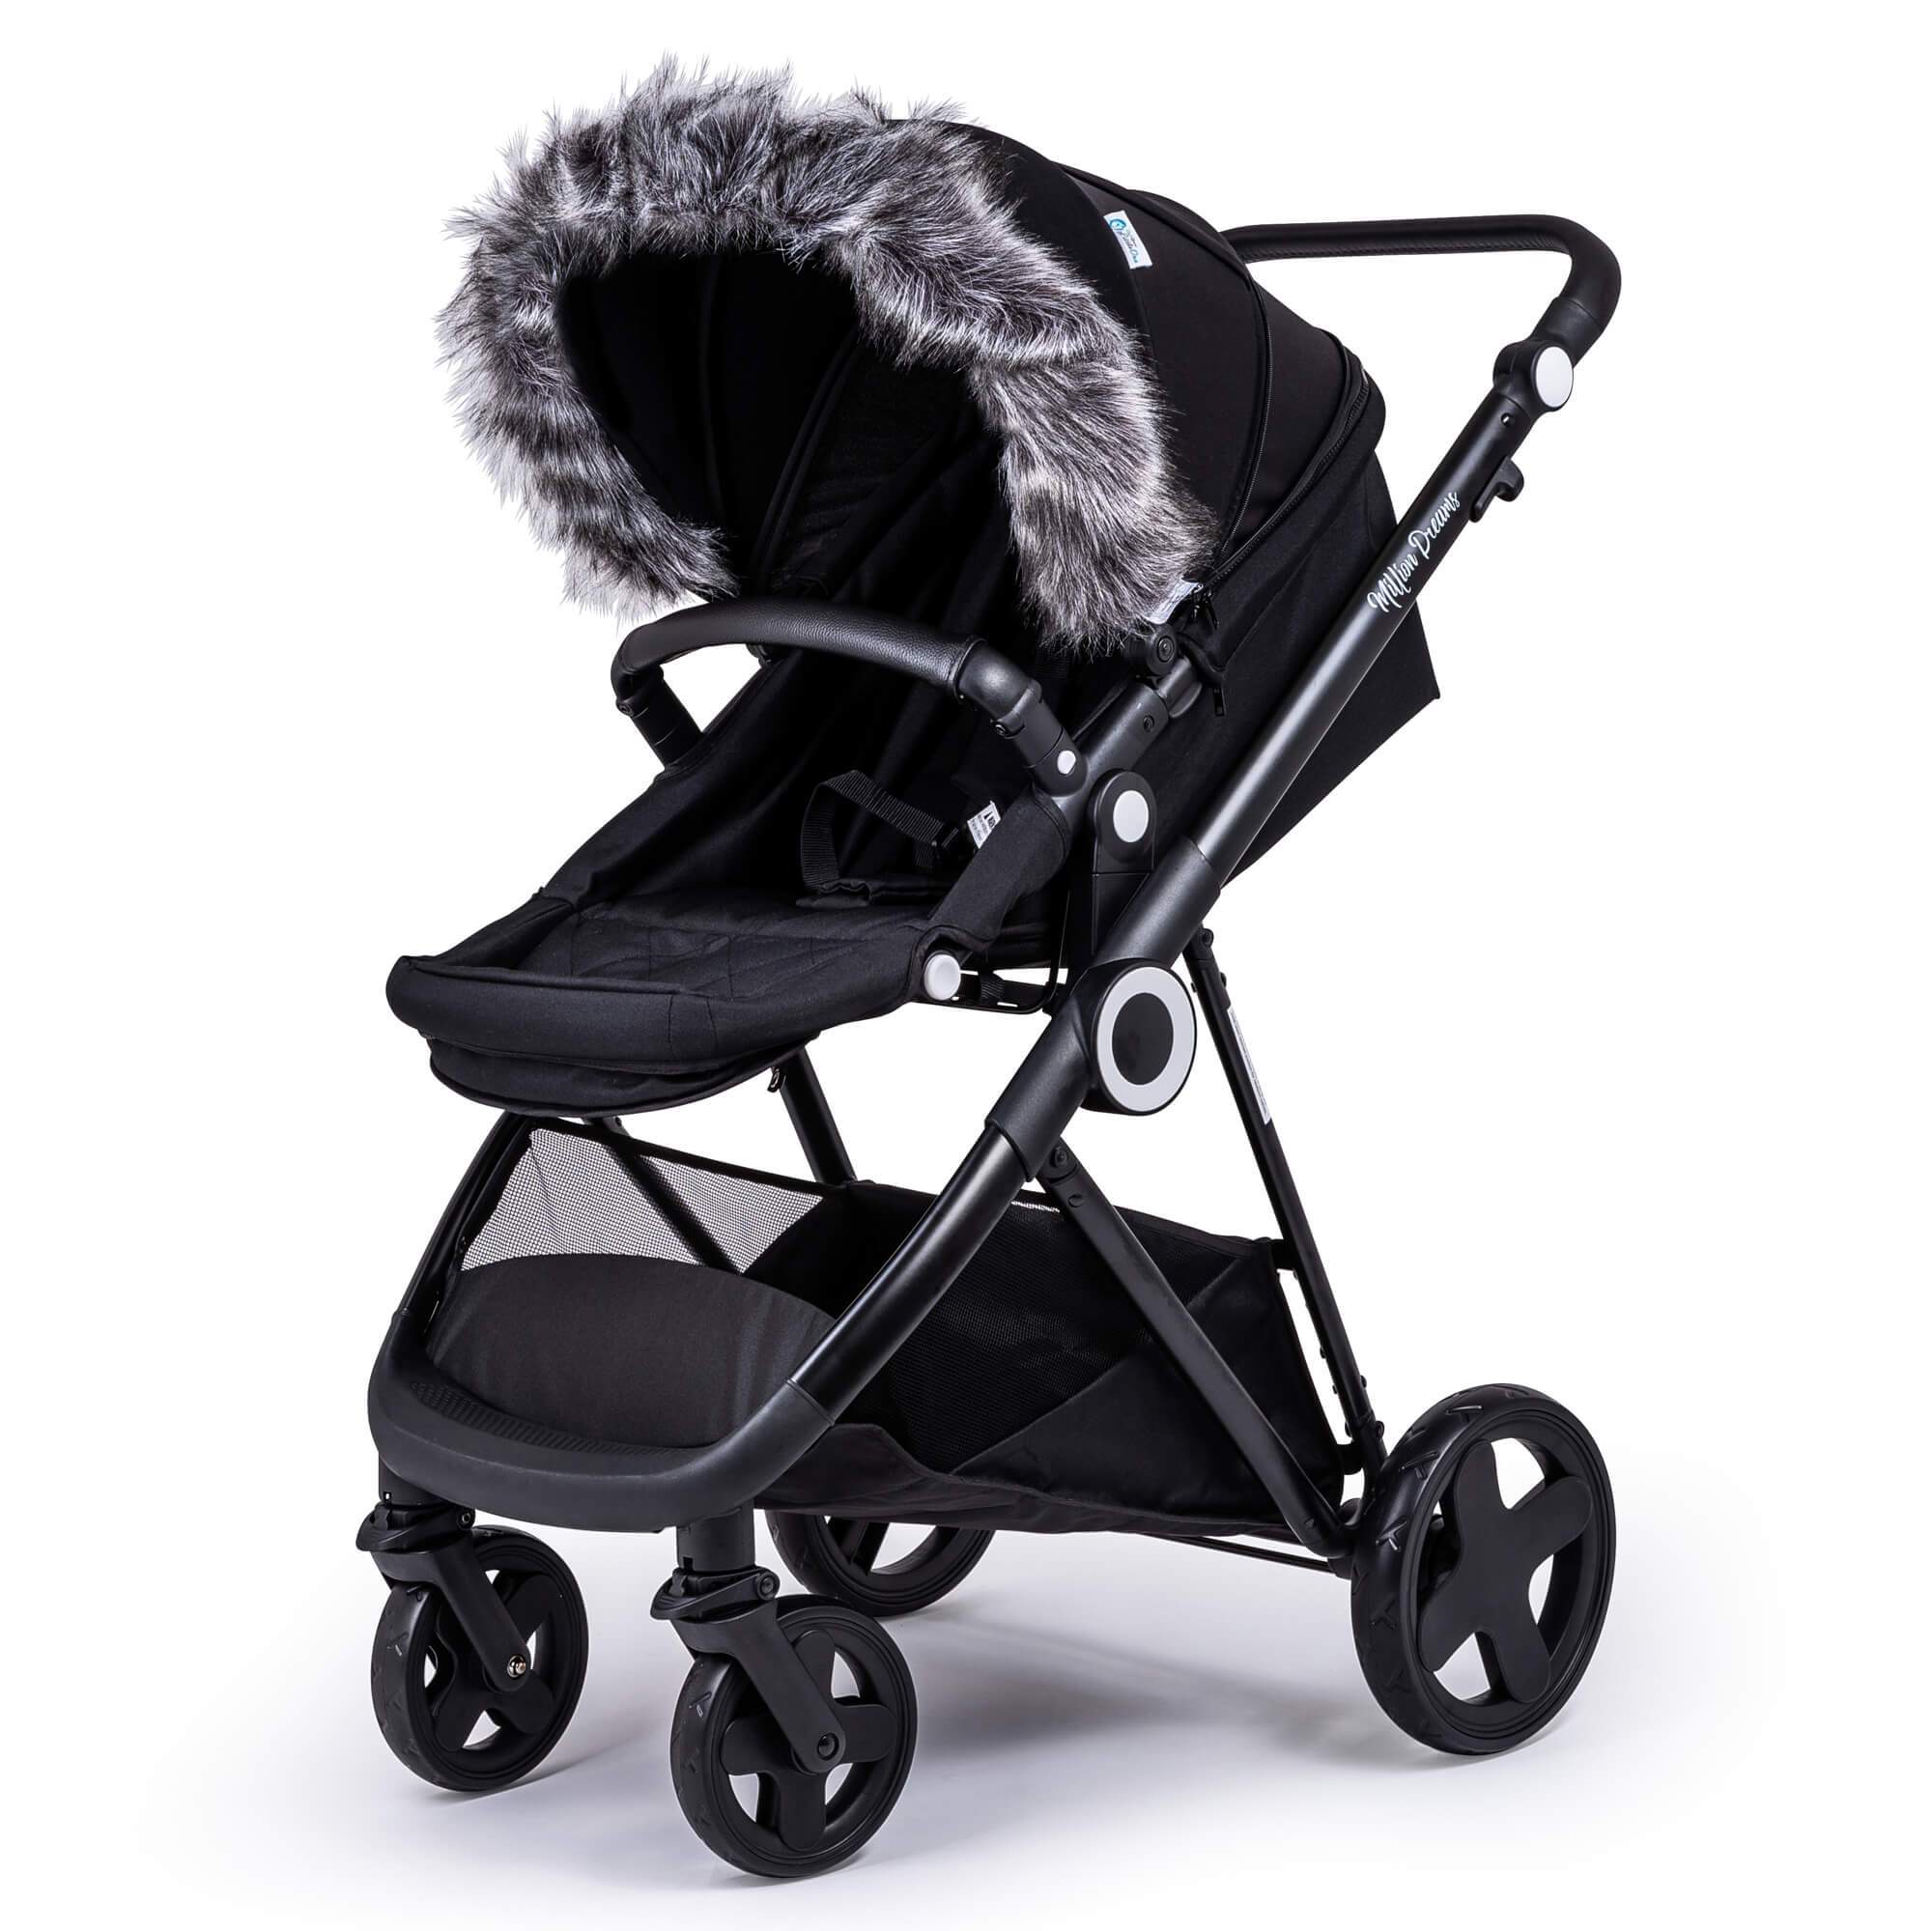 Pram Fur Hood Trim Attachment for Pushchair Compatible with Inglesina - Dark Grey / Fits All Models | For Your Little One